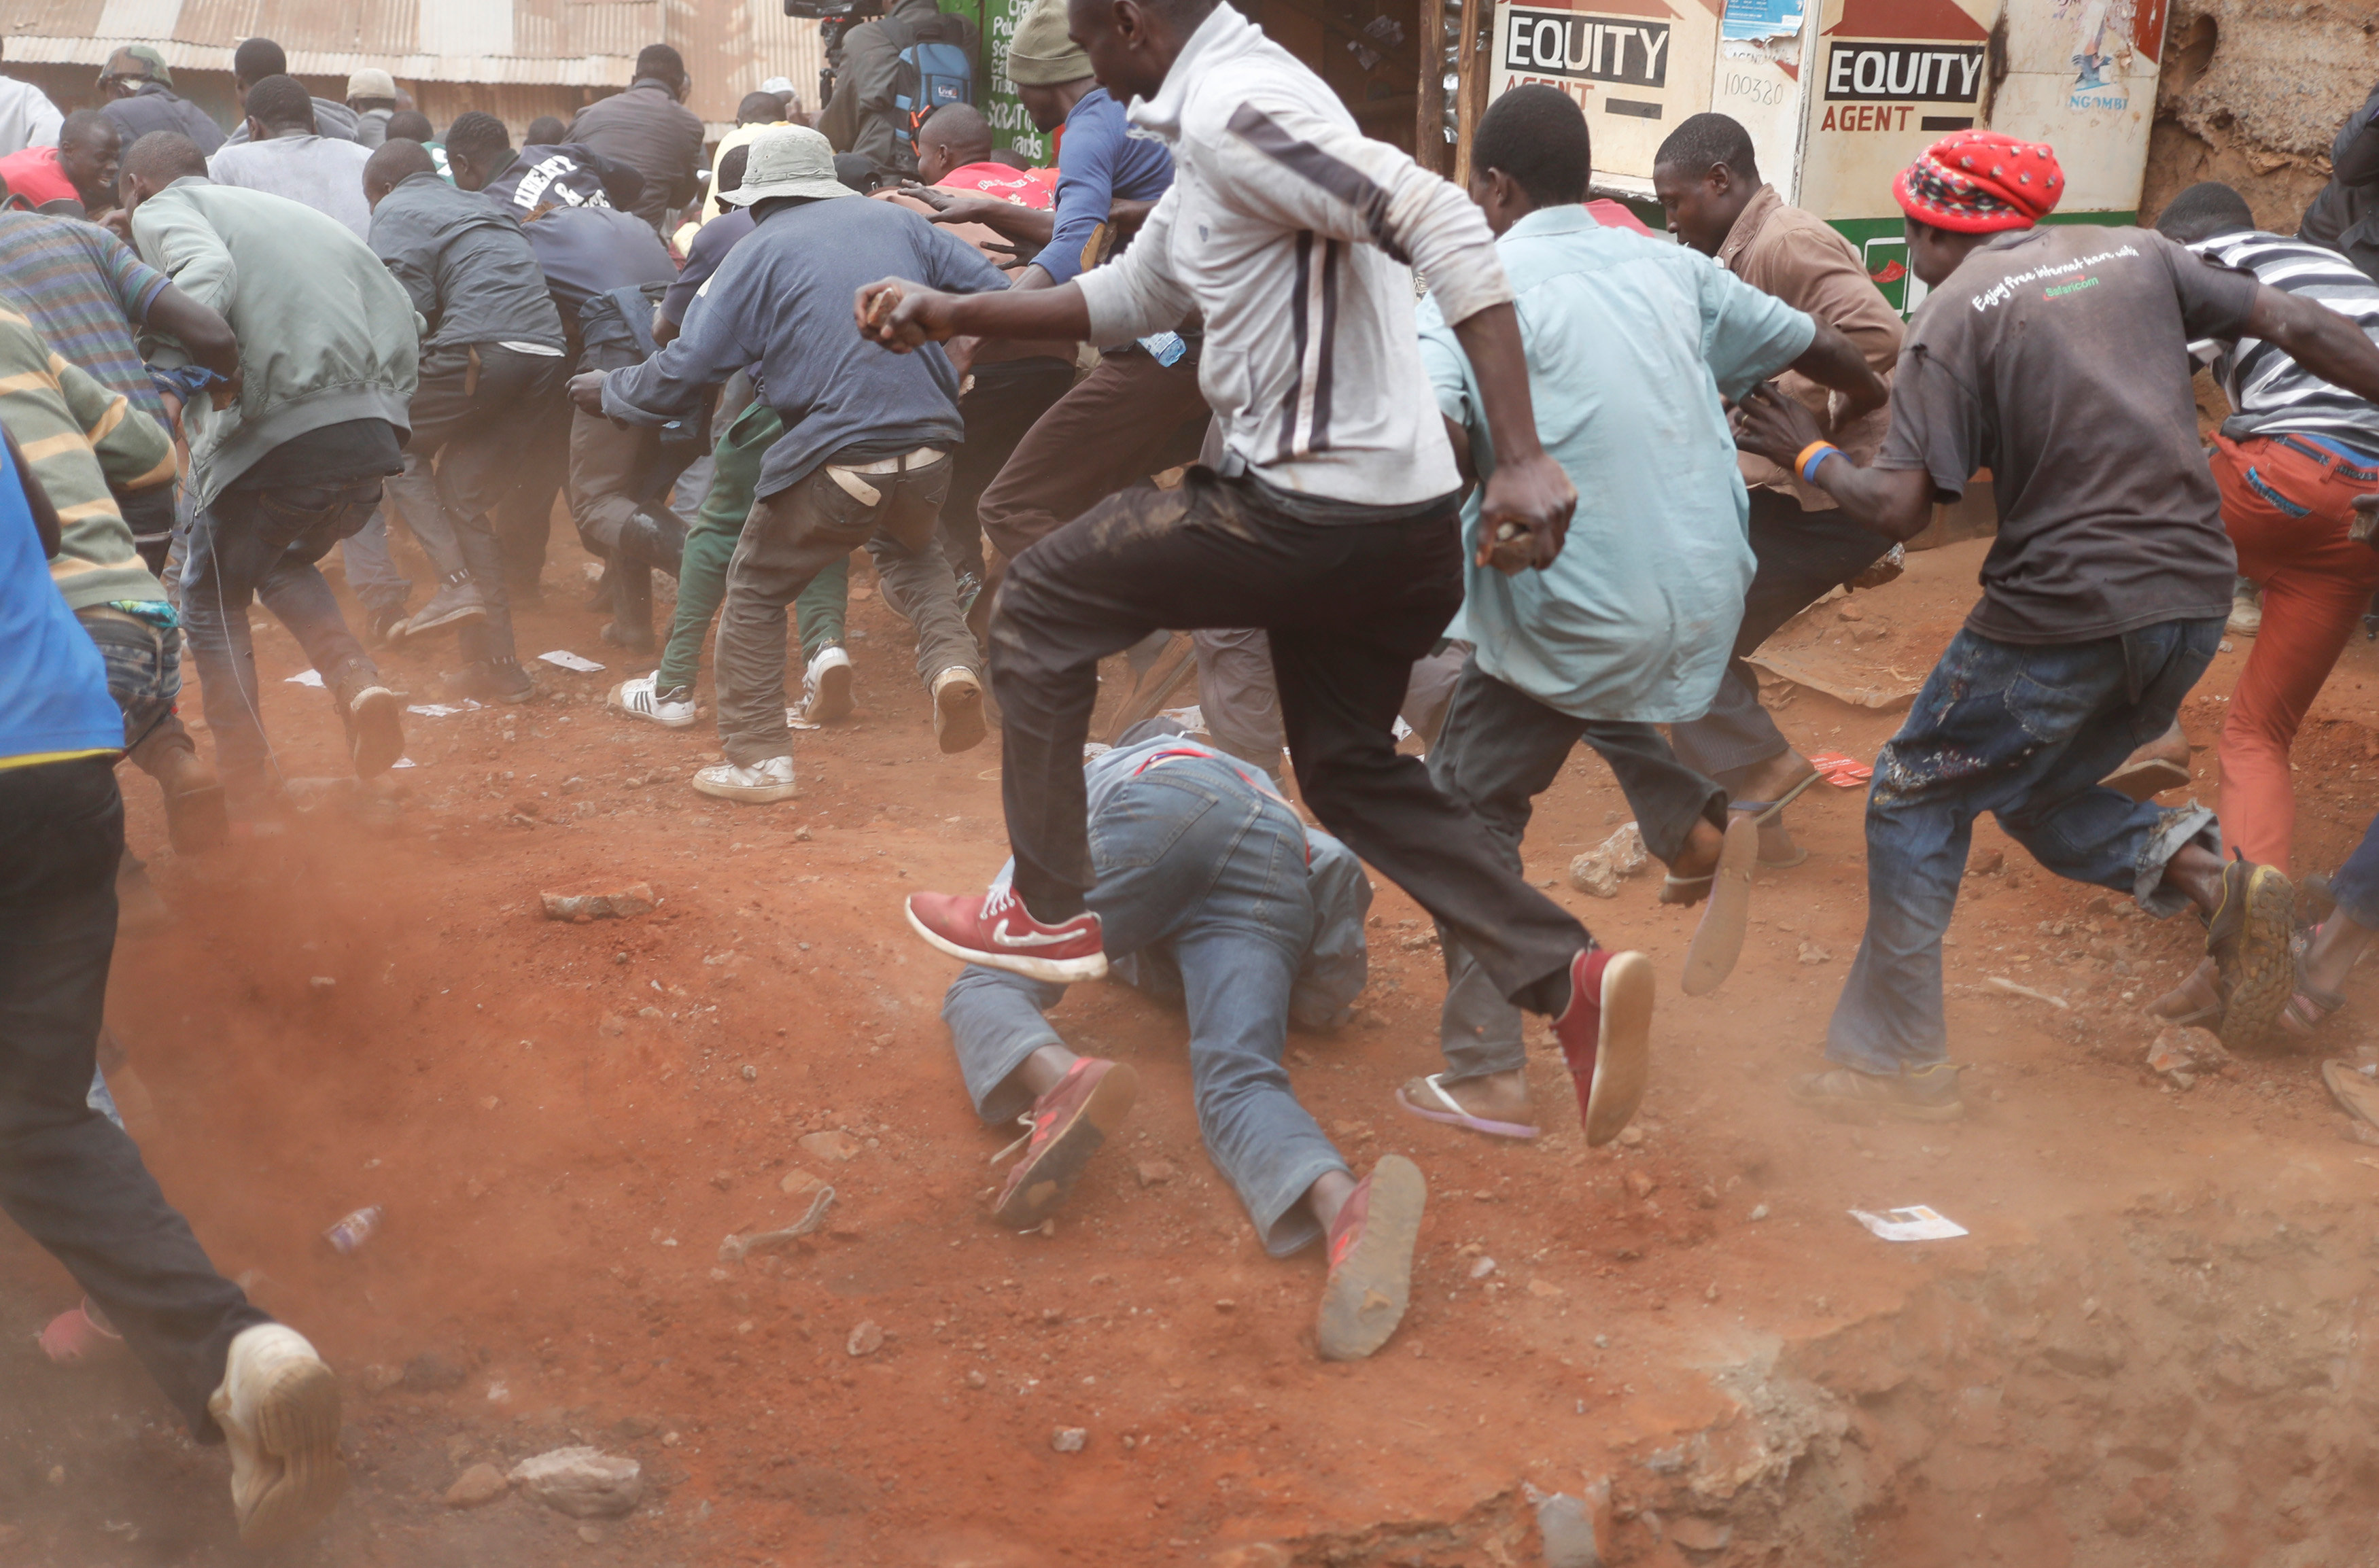 11 killed in Kenya as post-election riots flare